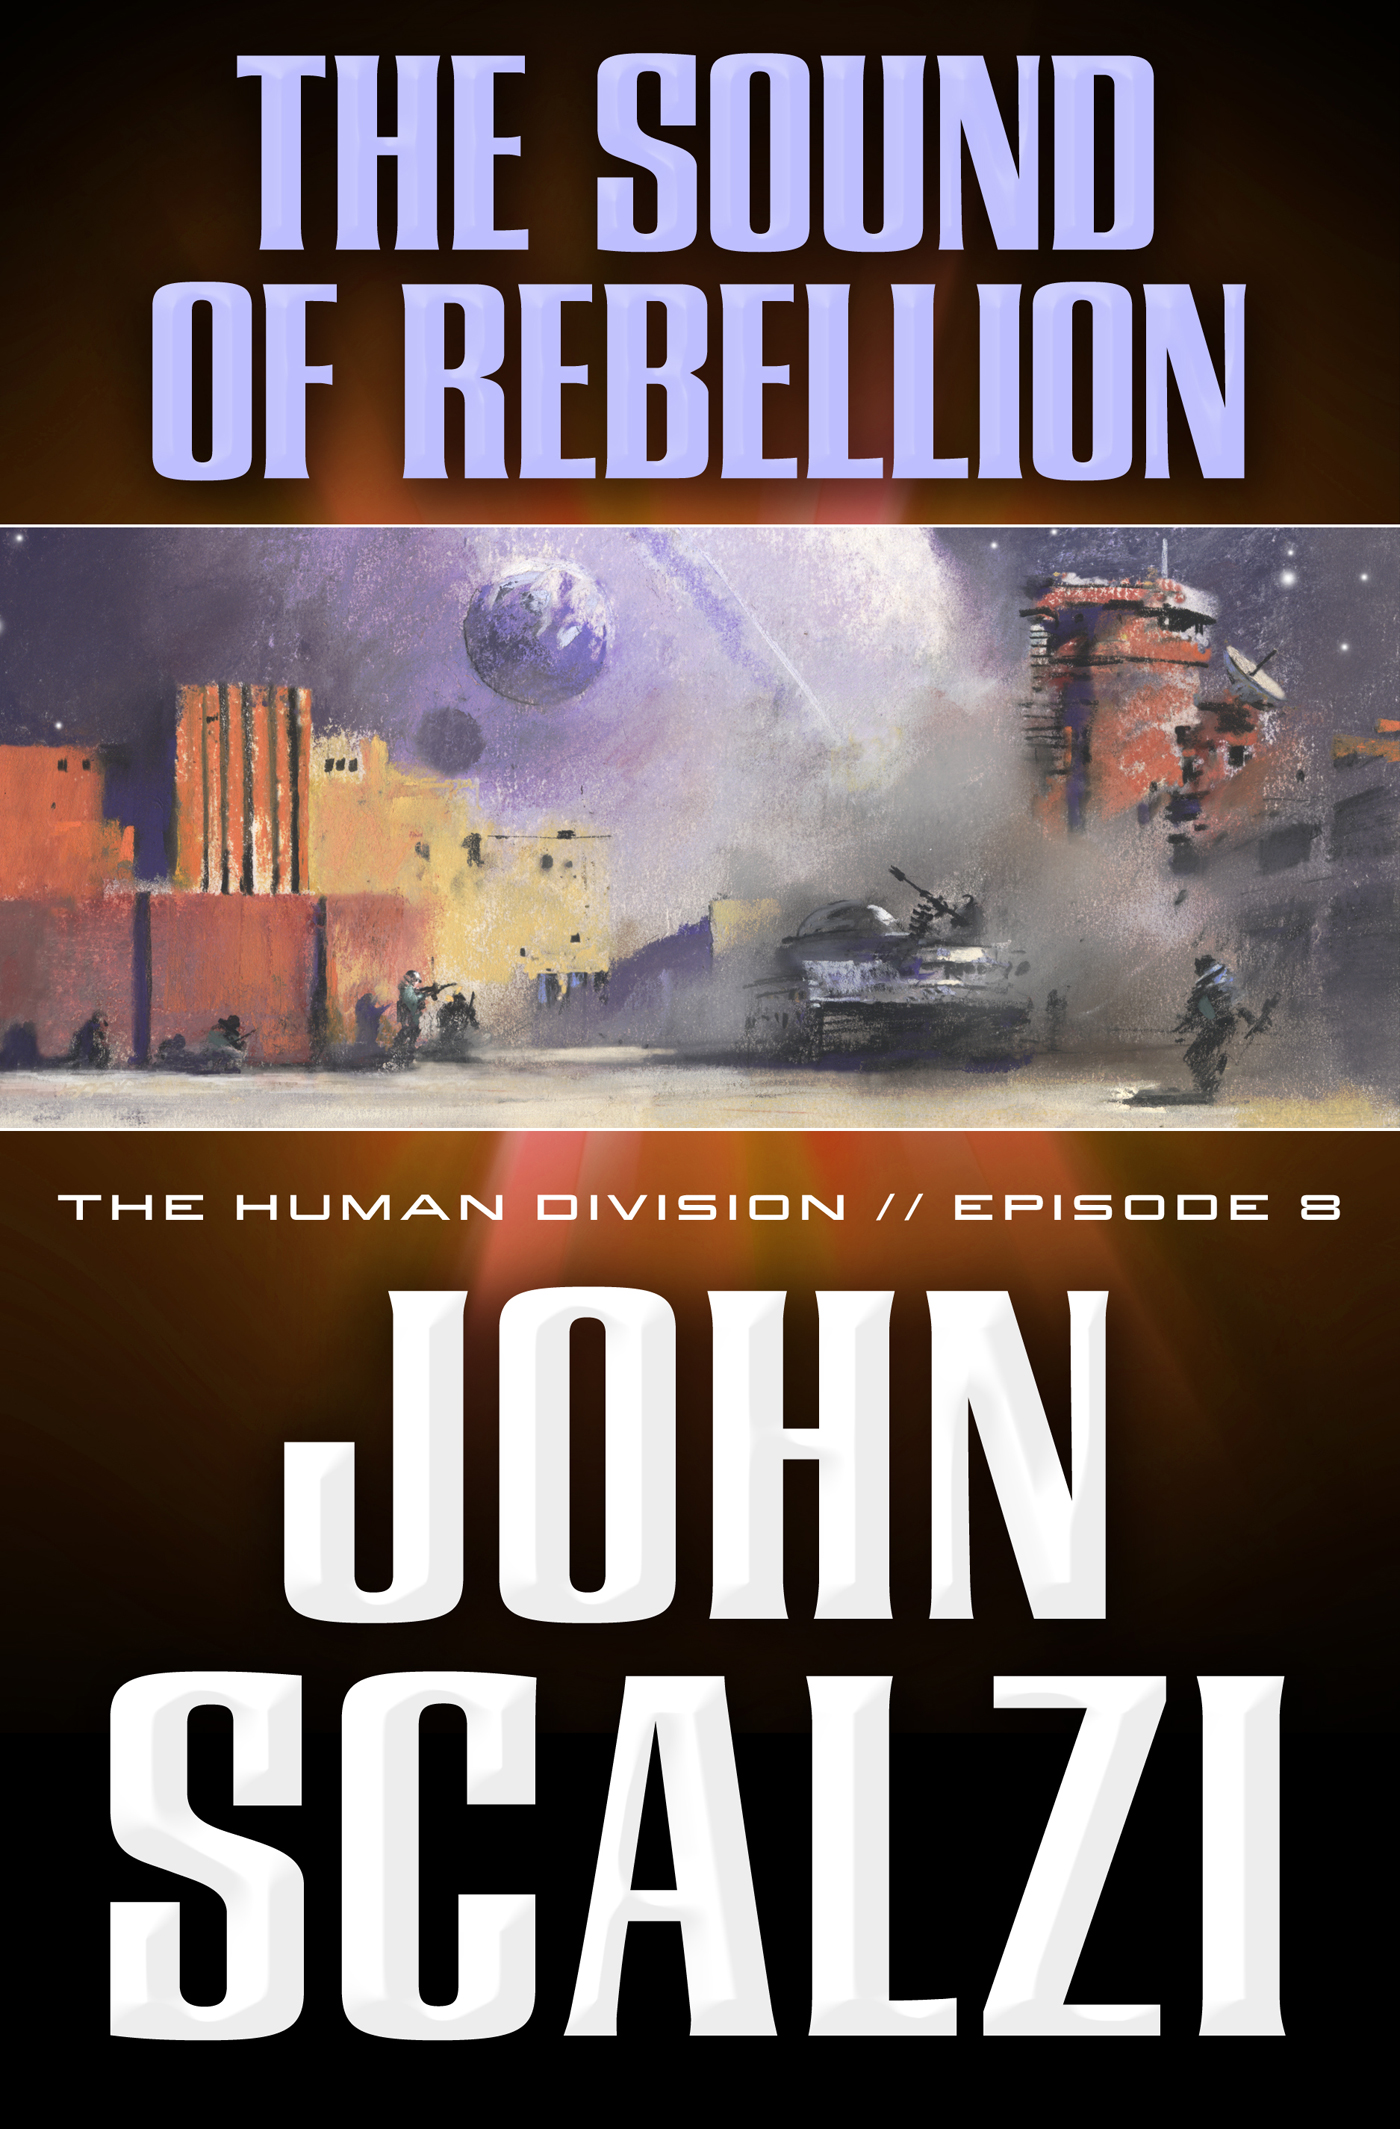 The Human Division #8: The Sound of Rebellion by John Scalzi